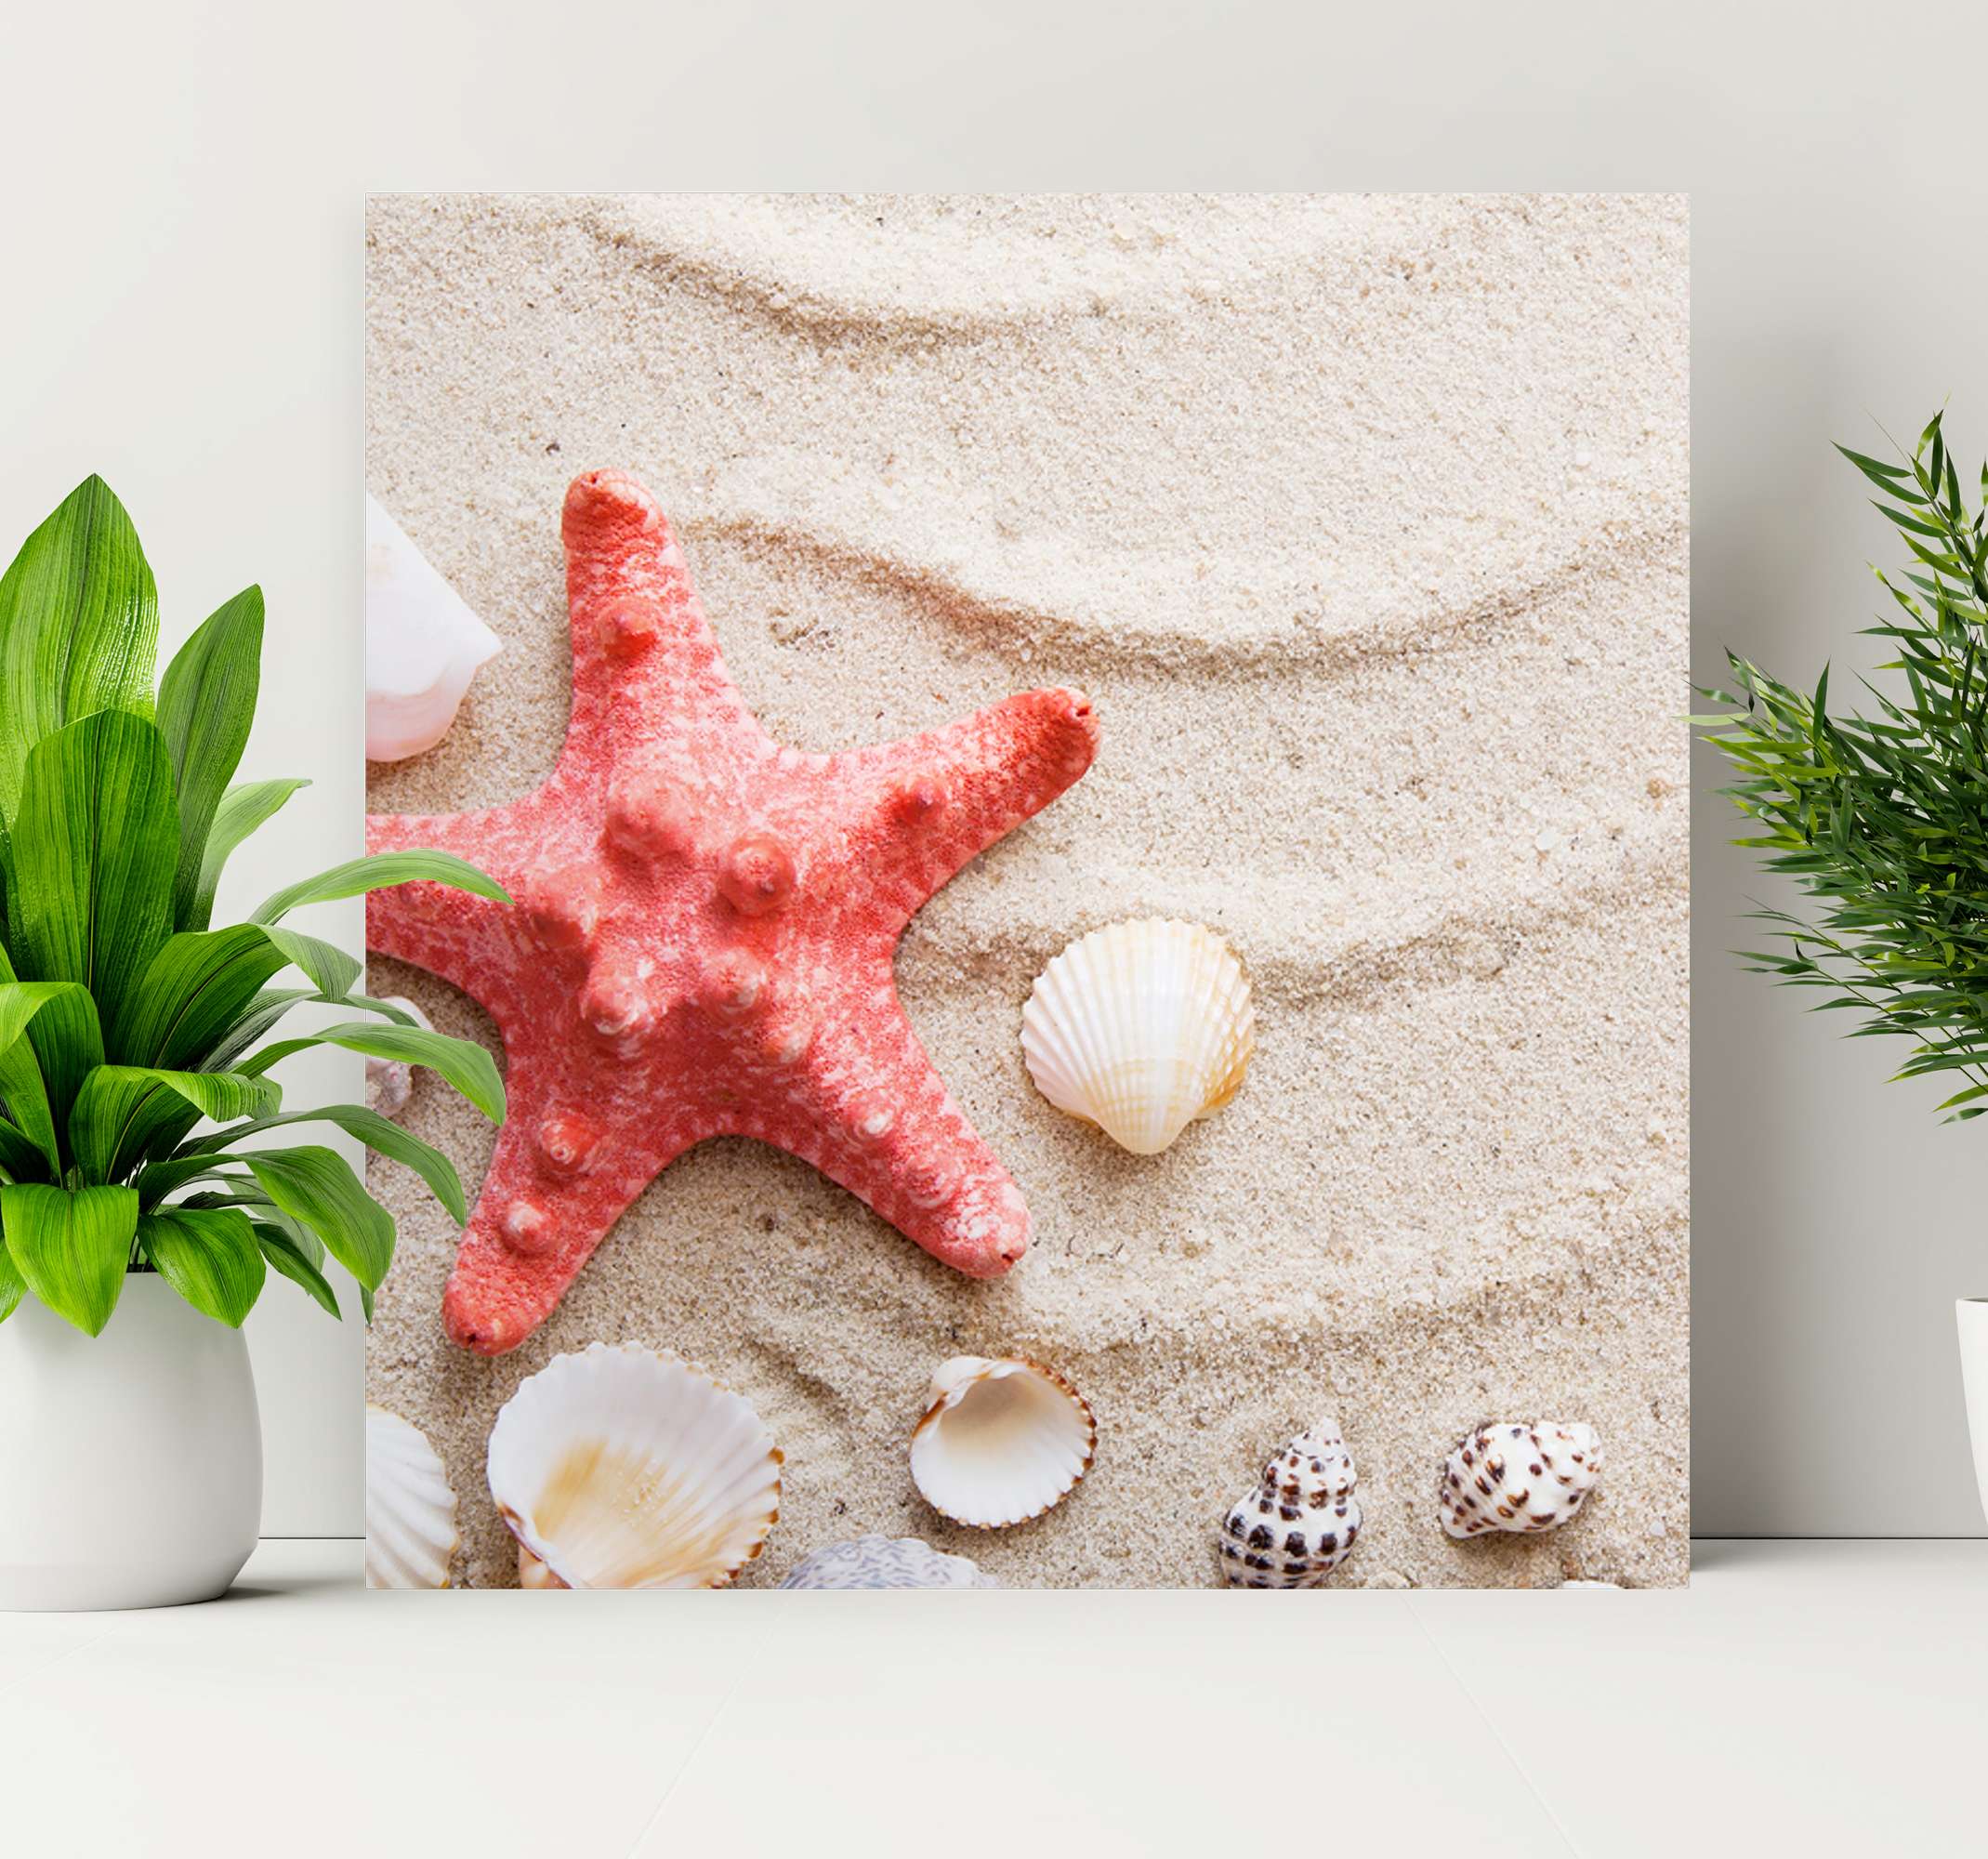 Sea Shells and Starfish – Canvas Art and Wall Art Prints from